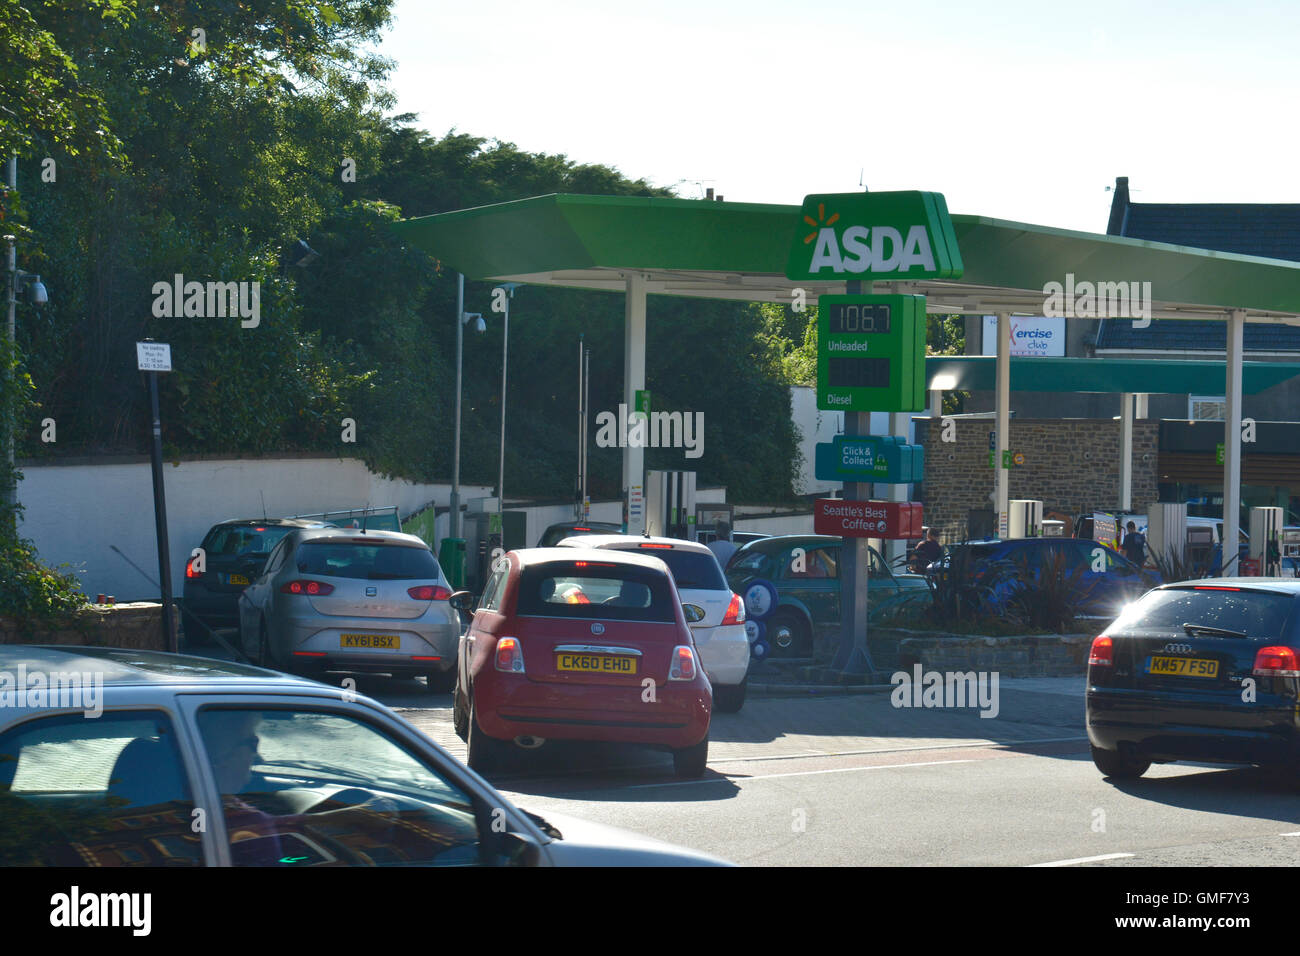 Bristol, UK. 26th August. Bank holiday traffic build up seen queuing for fuel on the top of whiteladies road filling station in Bristol. Credit:  Robert Timoney/Alamy Live News Stock Photo